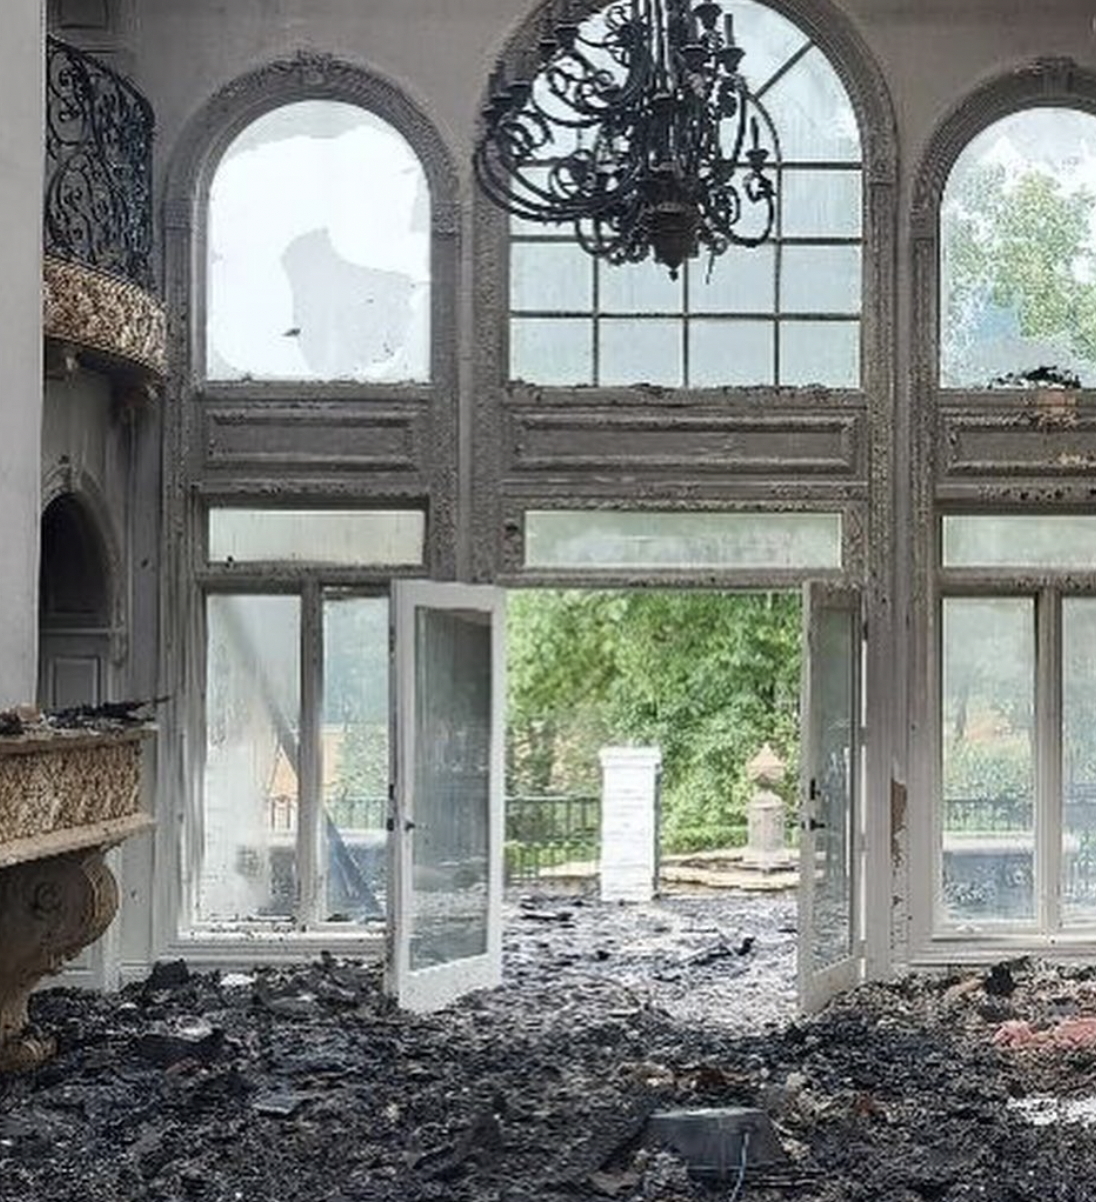 cursed zillow photo - burned mansion tennessee